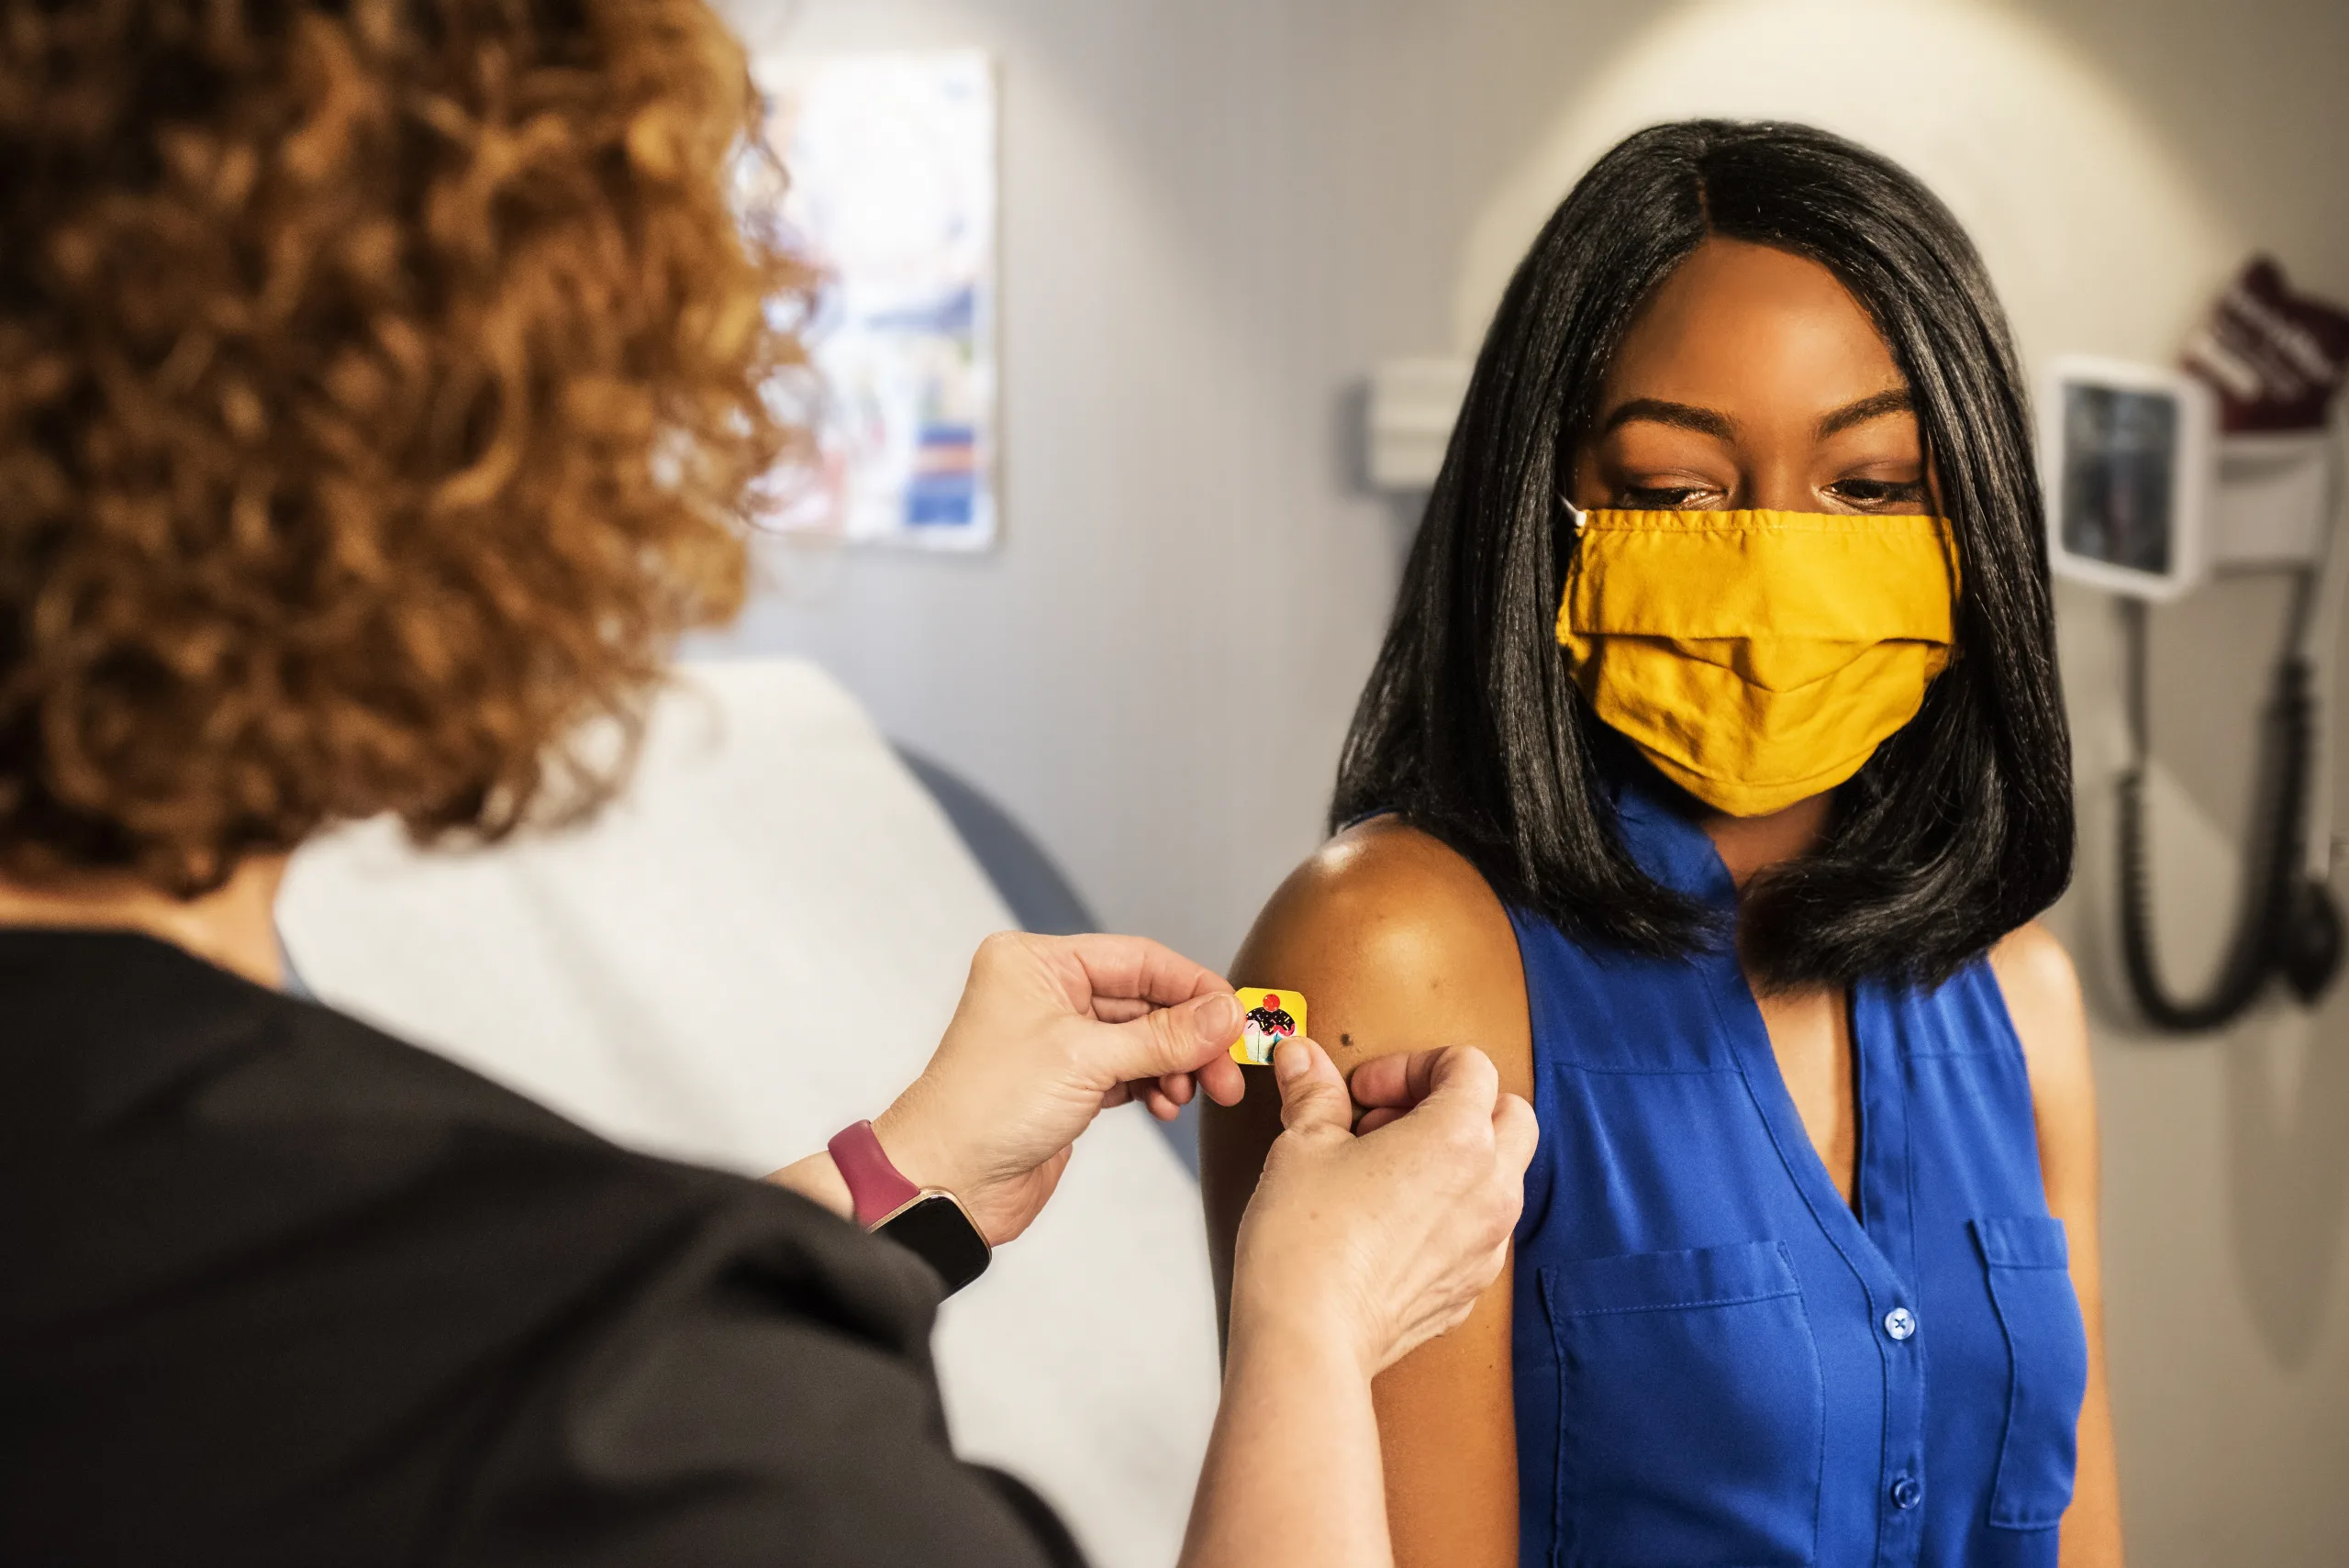 Photo: a health care provider and patient wearing a face mask, inside a clinical setting, the provider is placing a colorful bandage of the vaccination shot site on the patient's upper arm. (Source: CDC, unsplash)